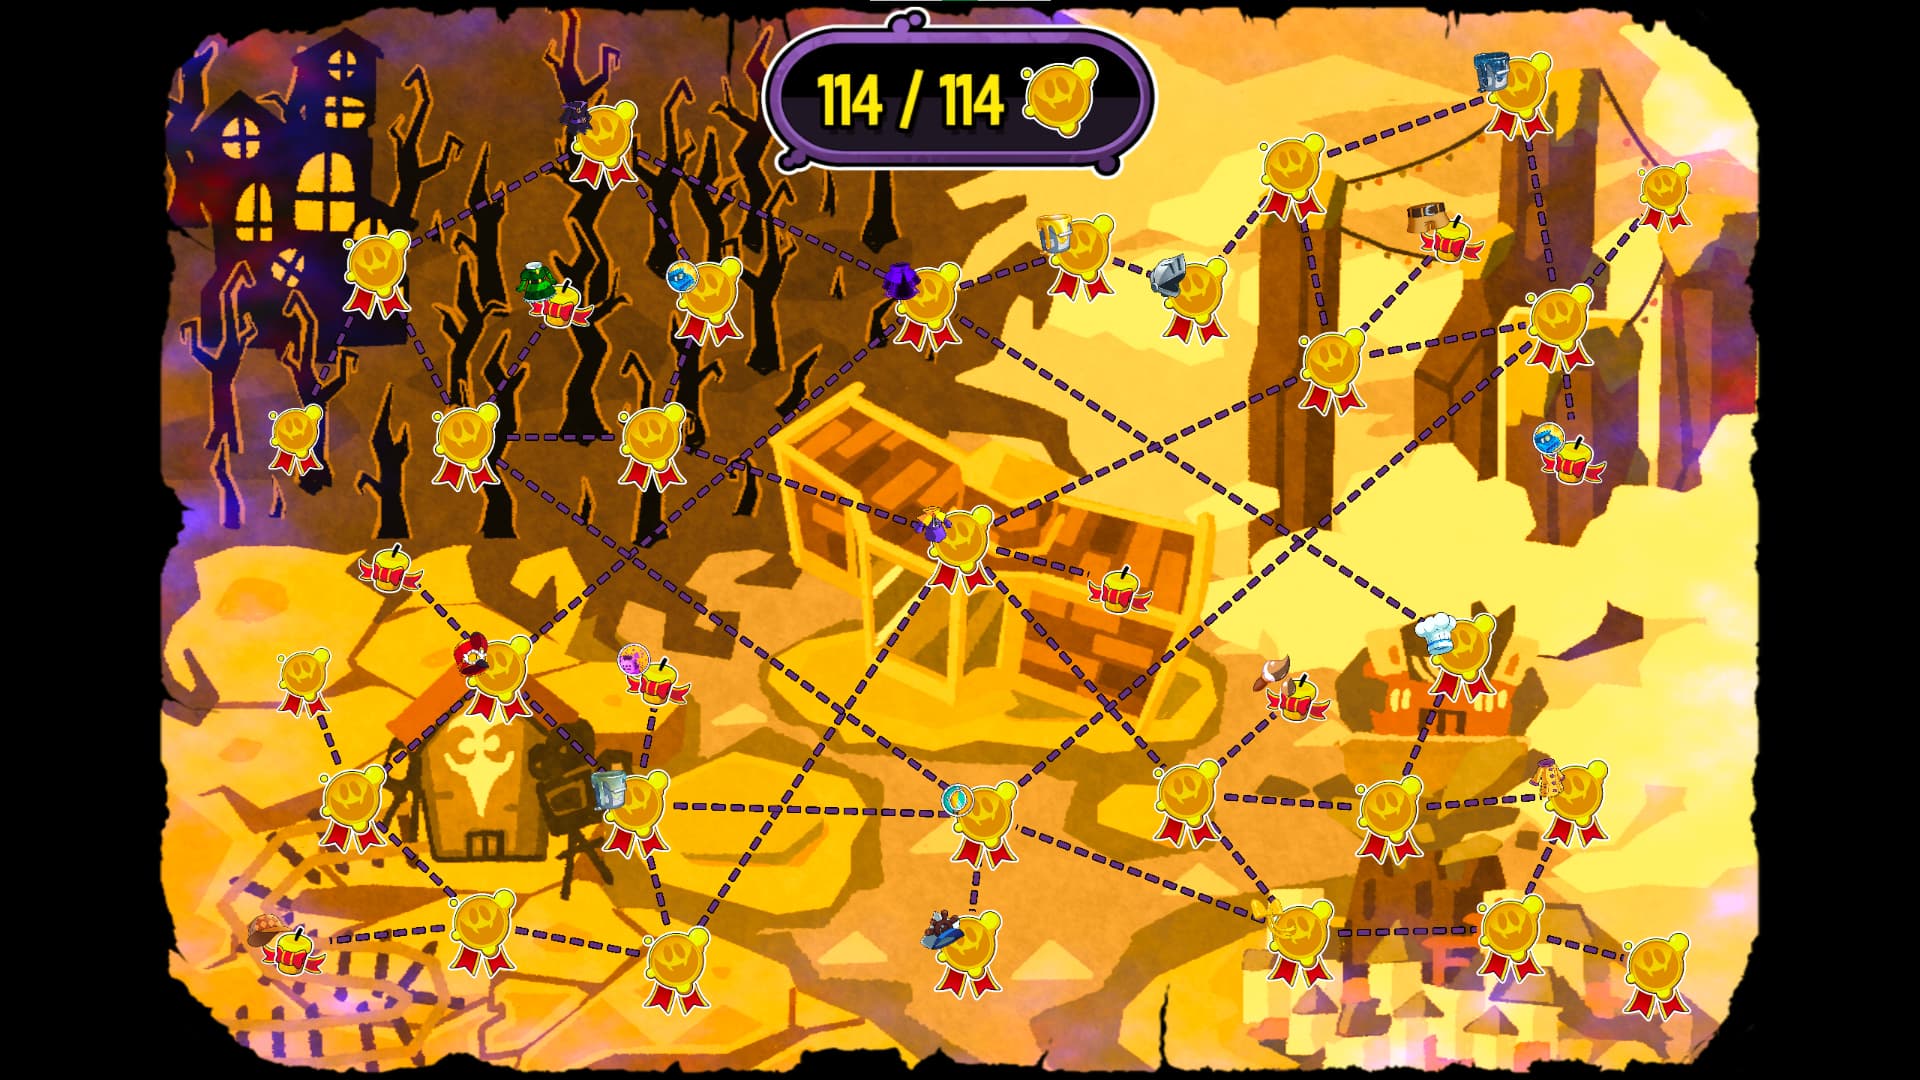 A screenshot of the fully completed Death Wish map, with 114 out of 114 stamps collected and with a golden background